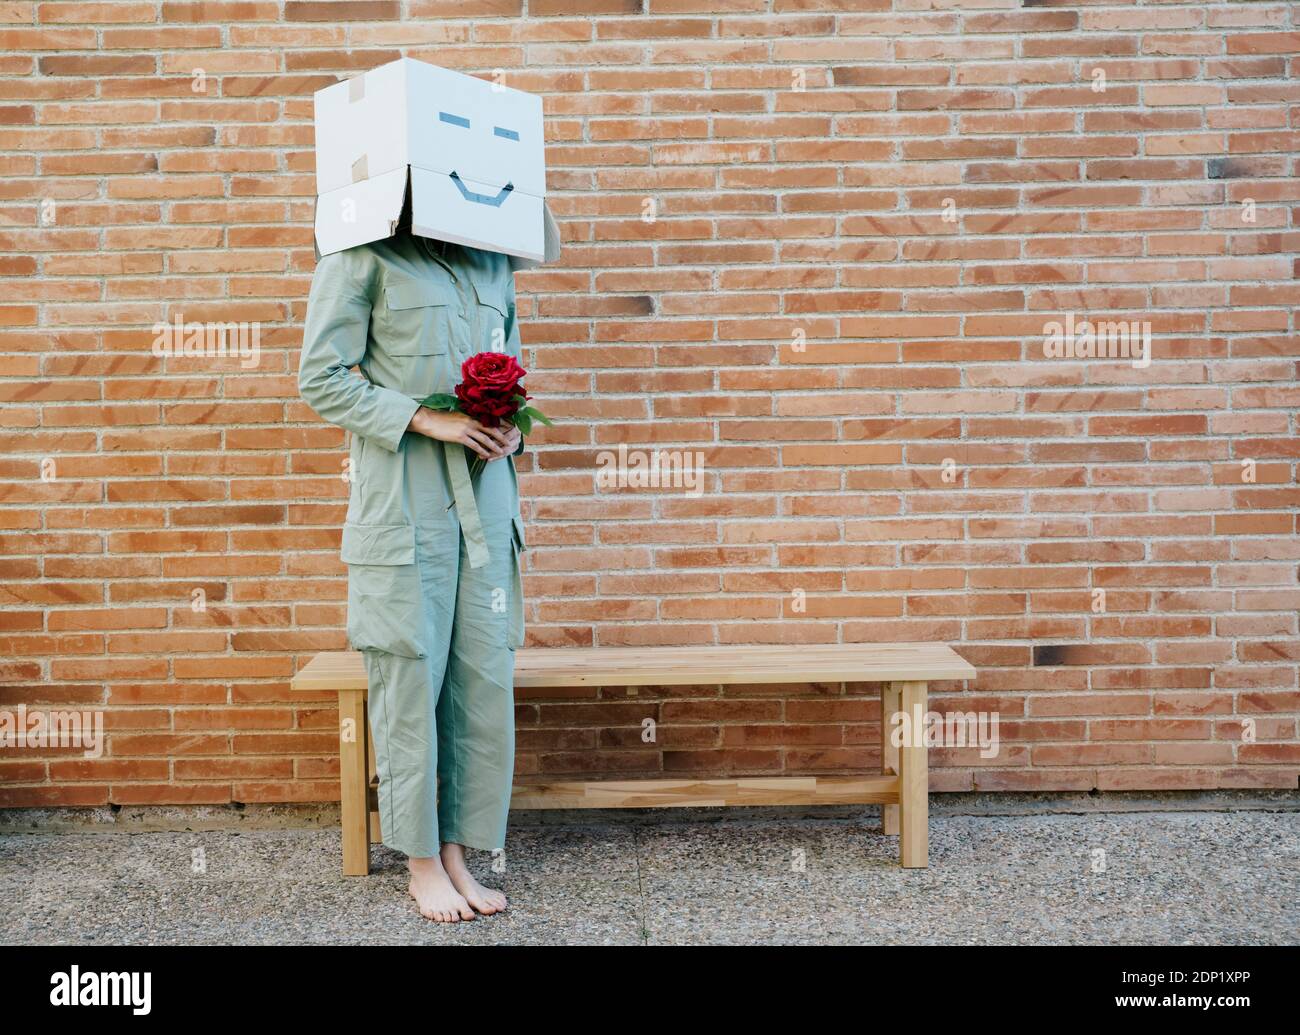 Woman holding red rose, wearing cardboard box with happy face, standing by bench in front of brick wall Stock Photo